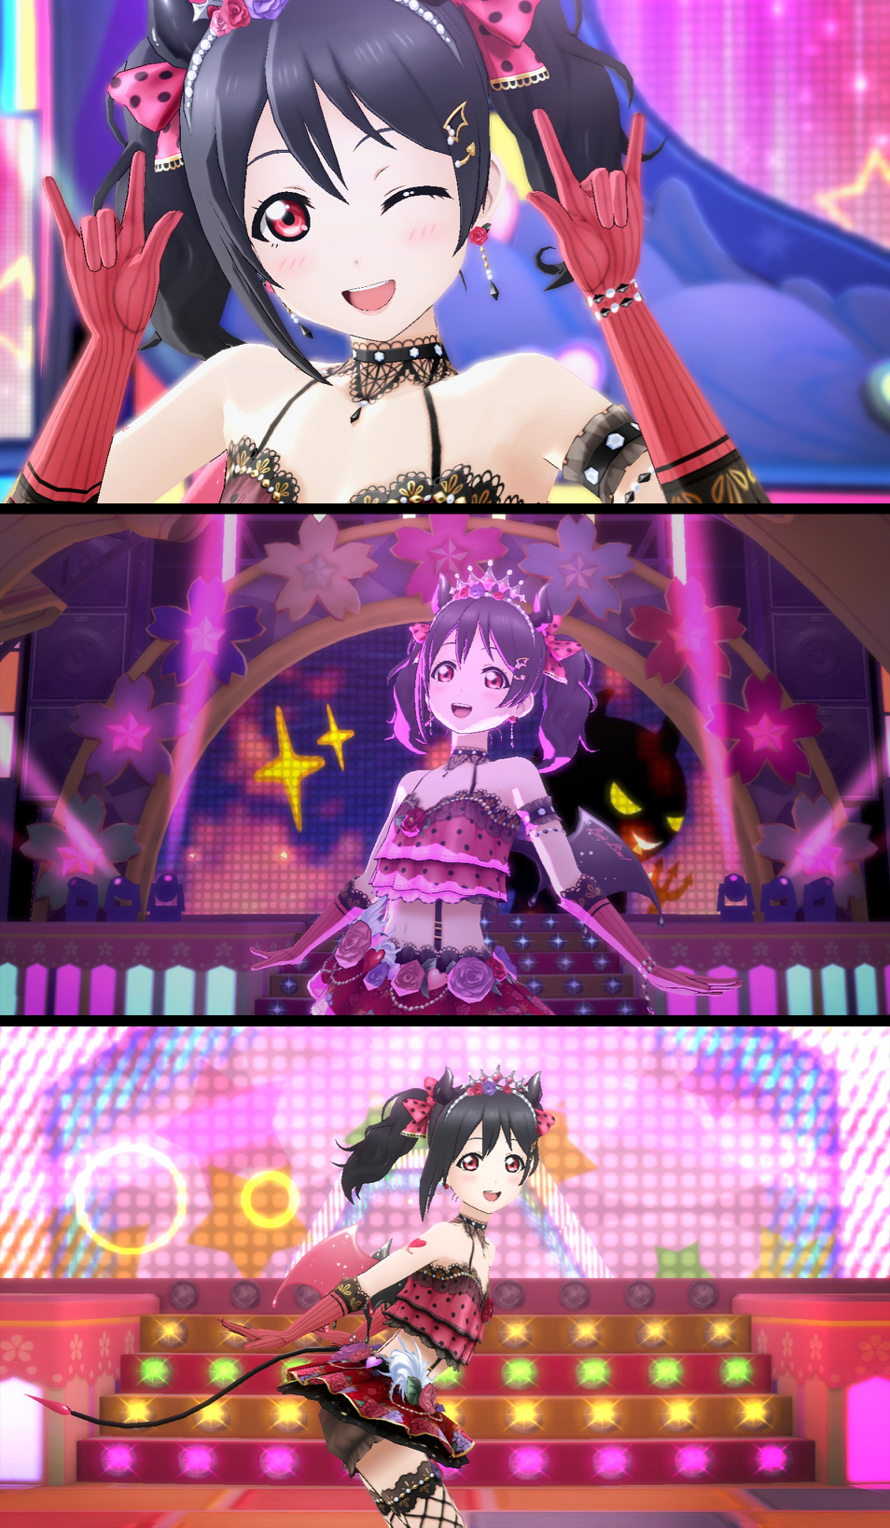 I pulled Nico! Little Devil is my favourite set on SIF. I have the whole series!